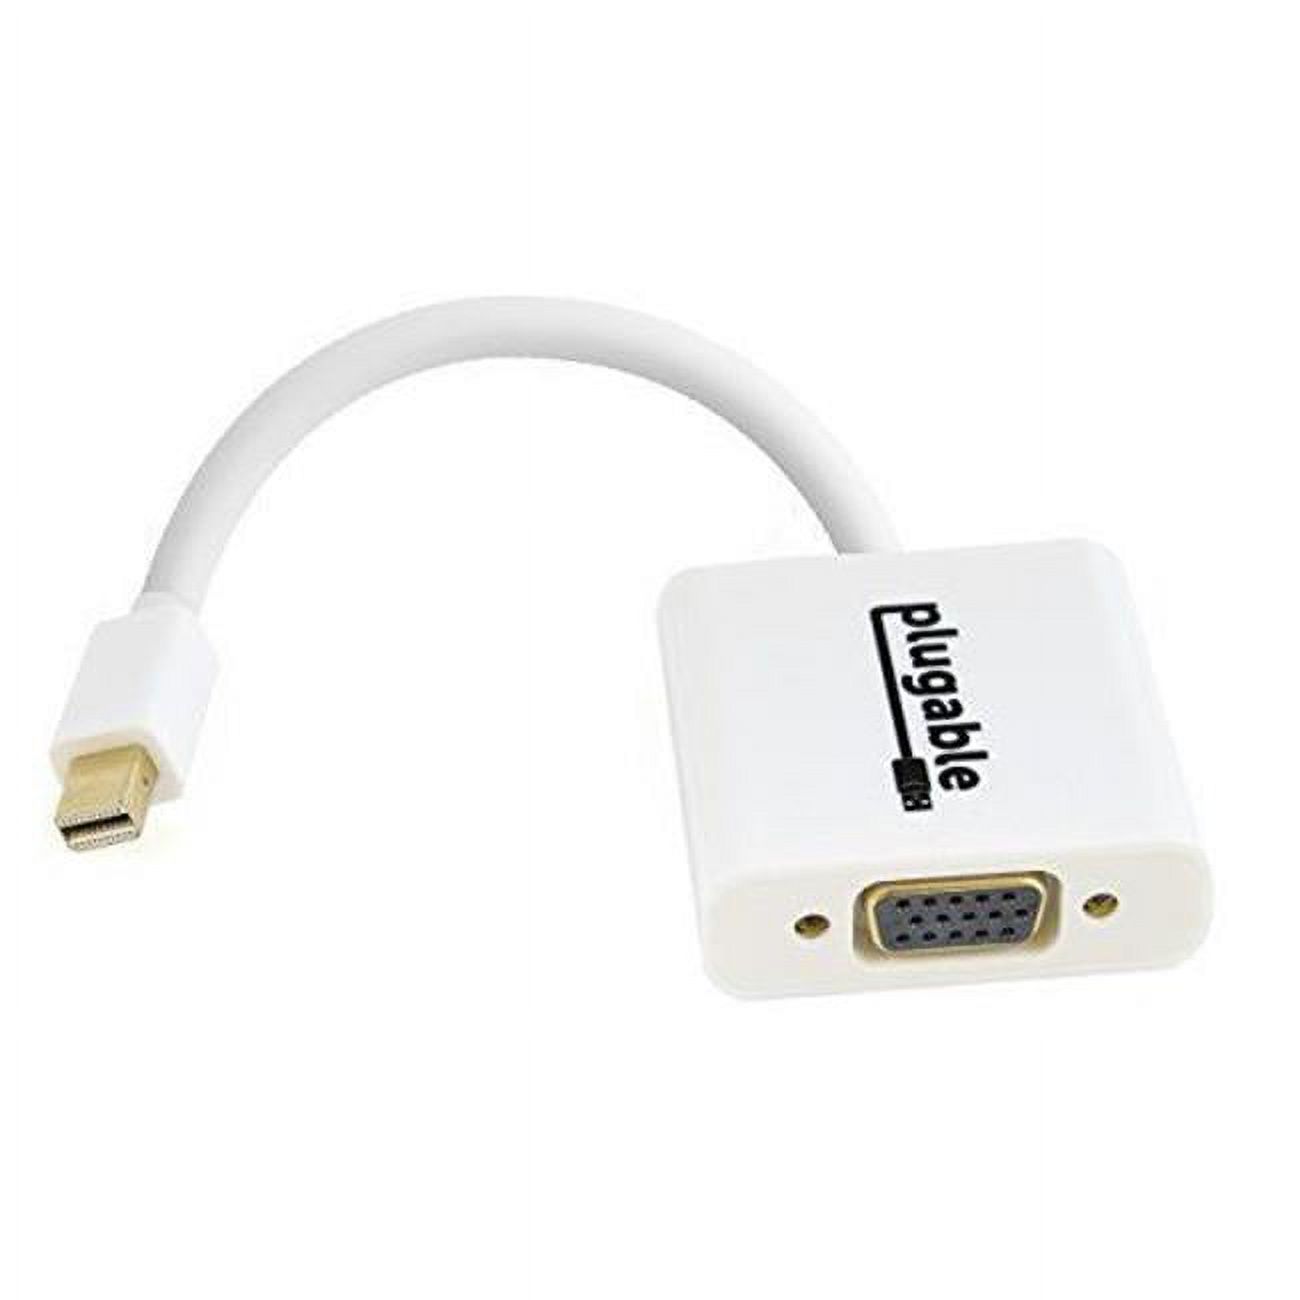 Plugable Mini DisplayPort (Thunderbolt 2) to VGA Adapter (Supports Mac, Windows, Linux Systems and Displays up to 1920x1080, Active) - image 1 of 5